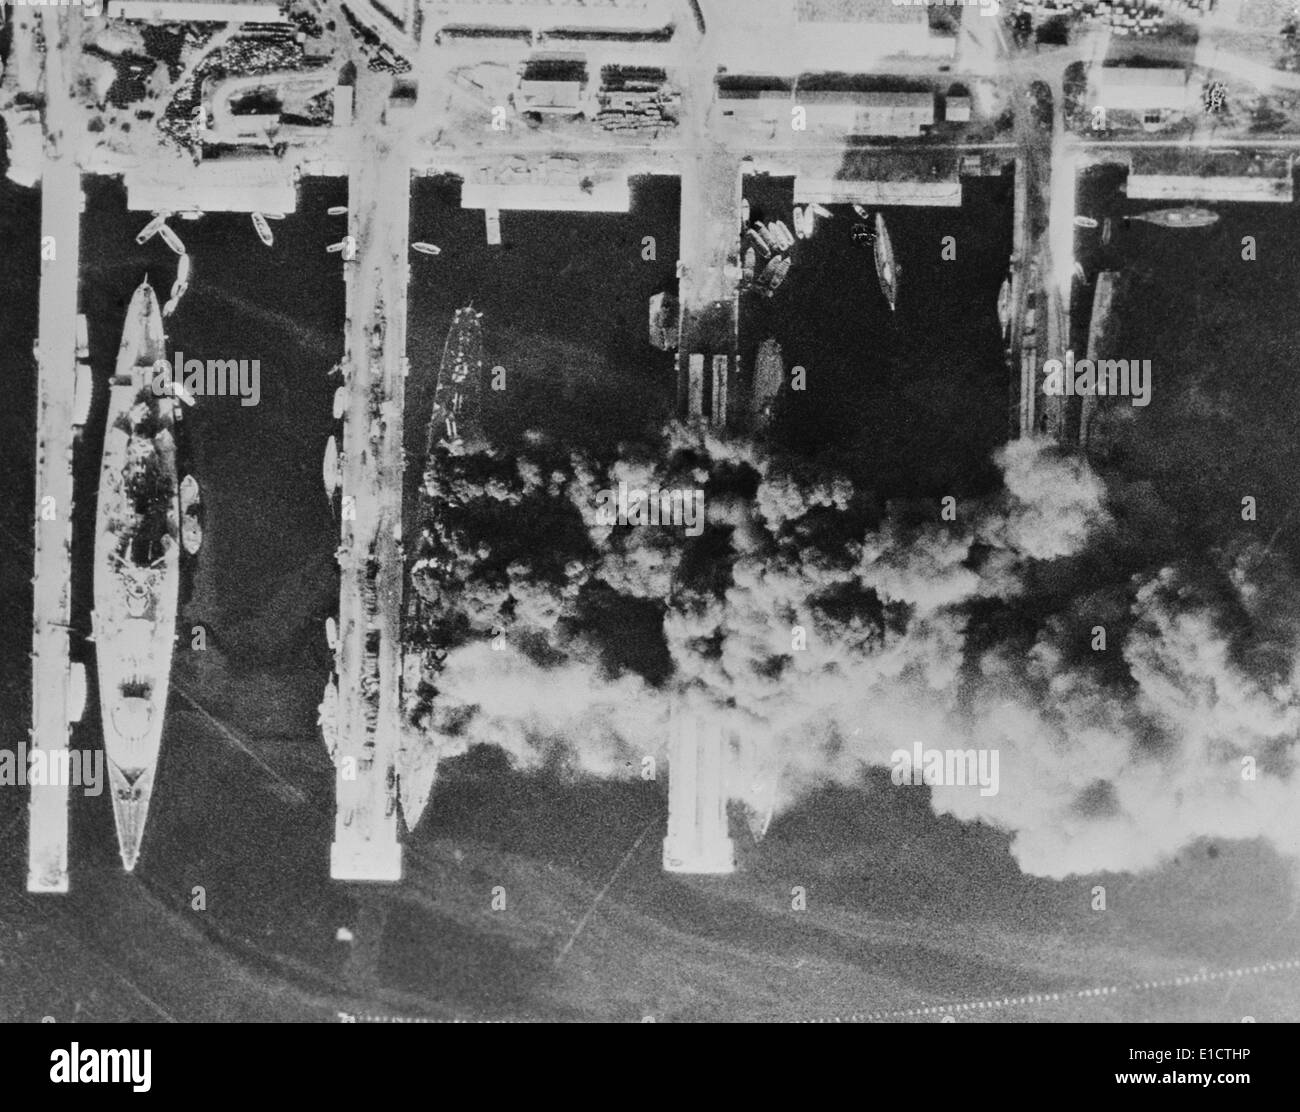 Aerial photos of the scuttled French fleet at Toulon, Nov. 27-28, 1942. Vichy France Admiralty ordered the destruction to avoid Stock Photo